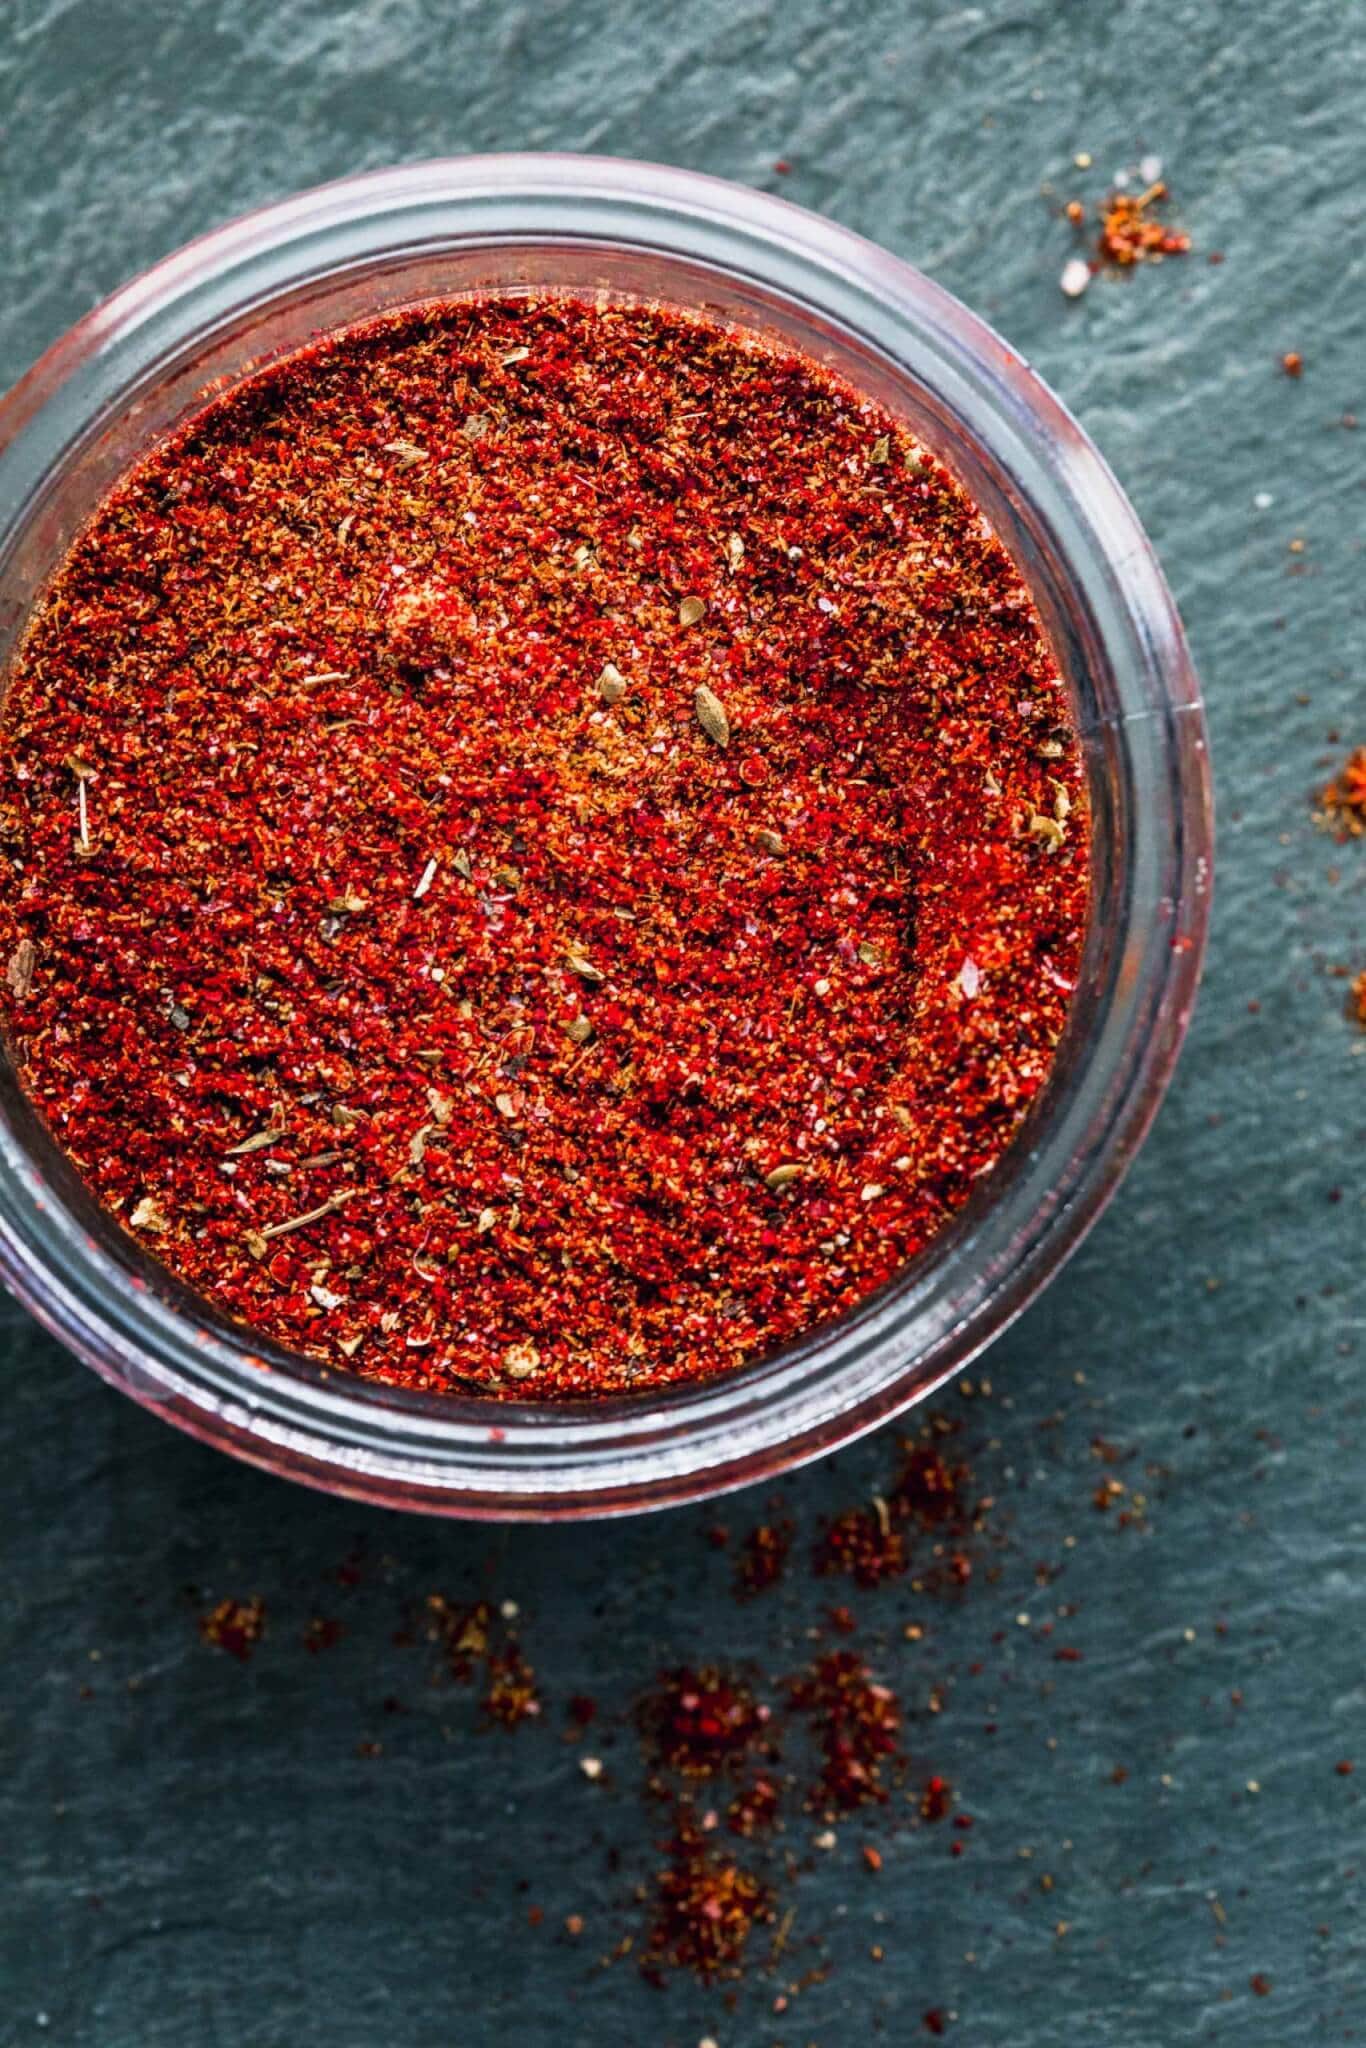 OVERHEAD SHOT OF TACO SEASONING IN GLASS CONTAINER